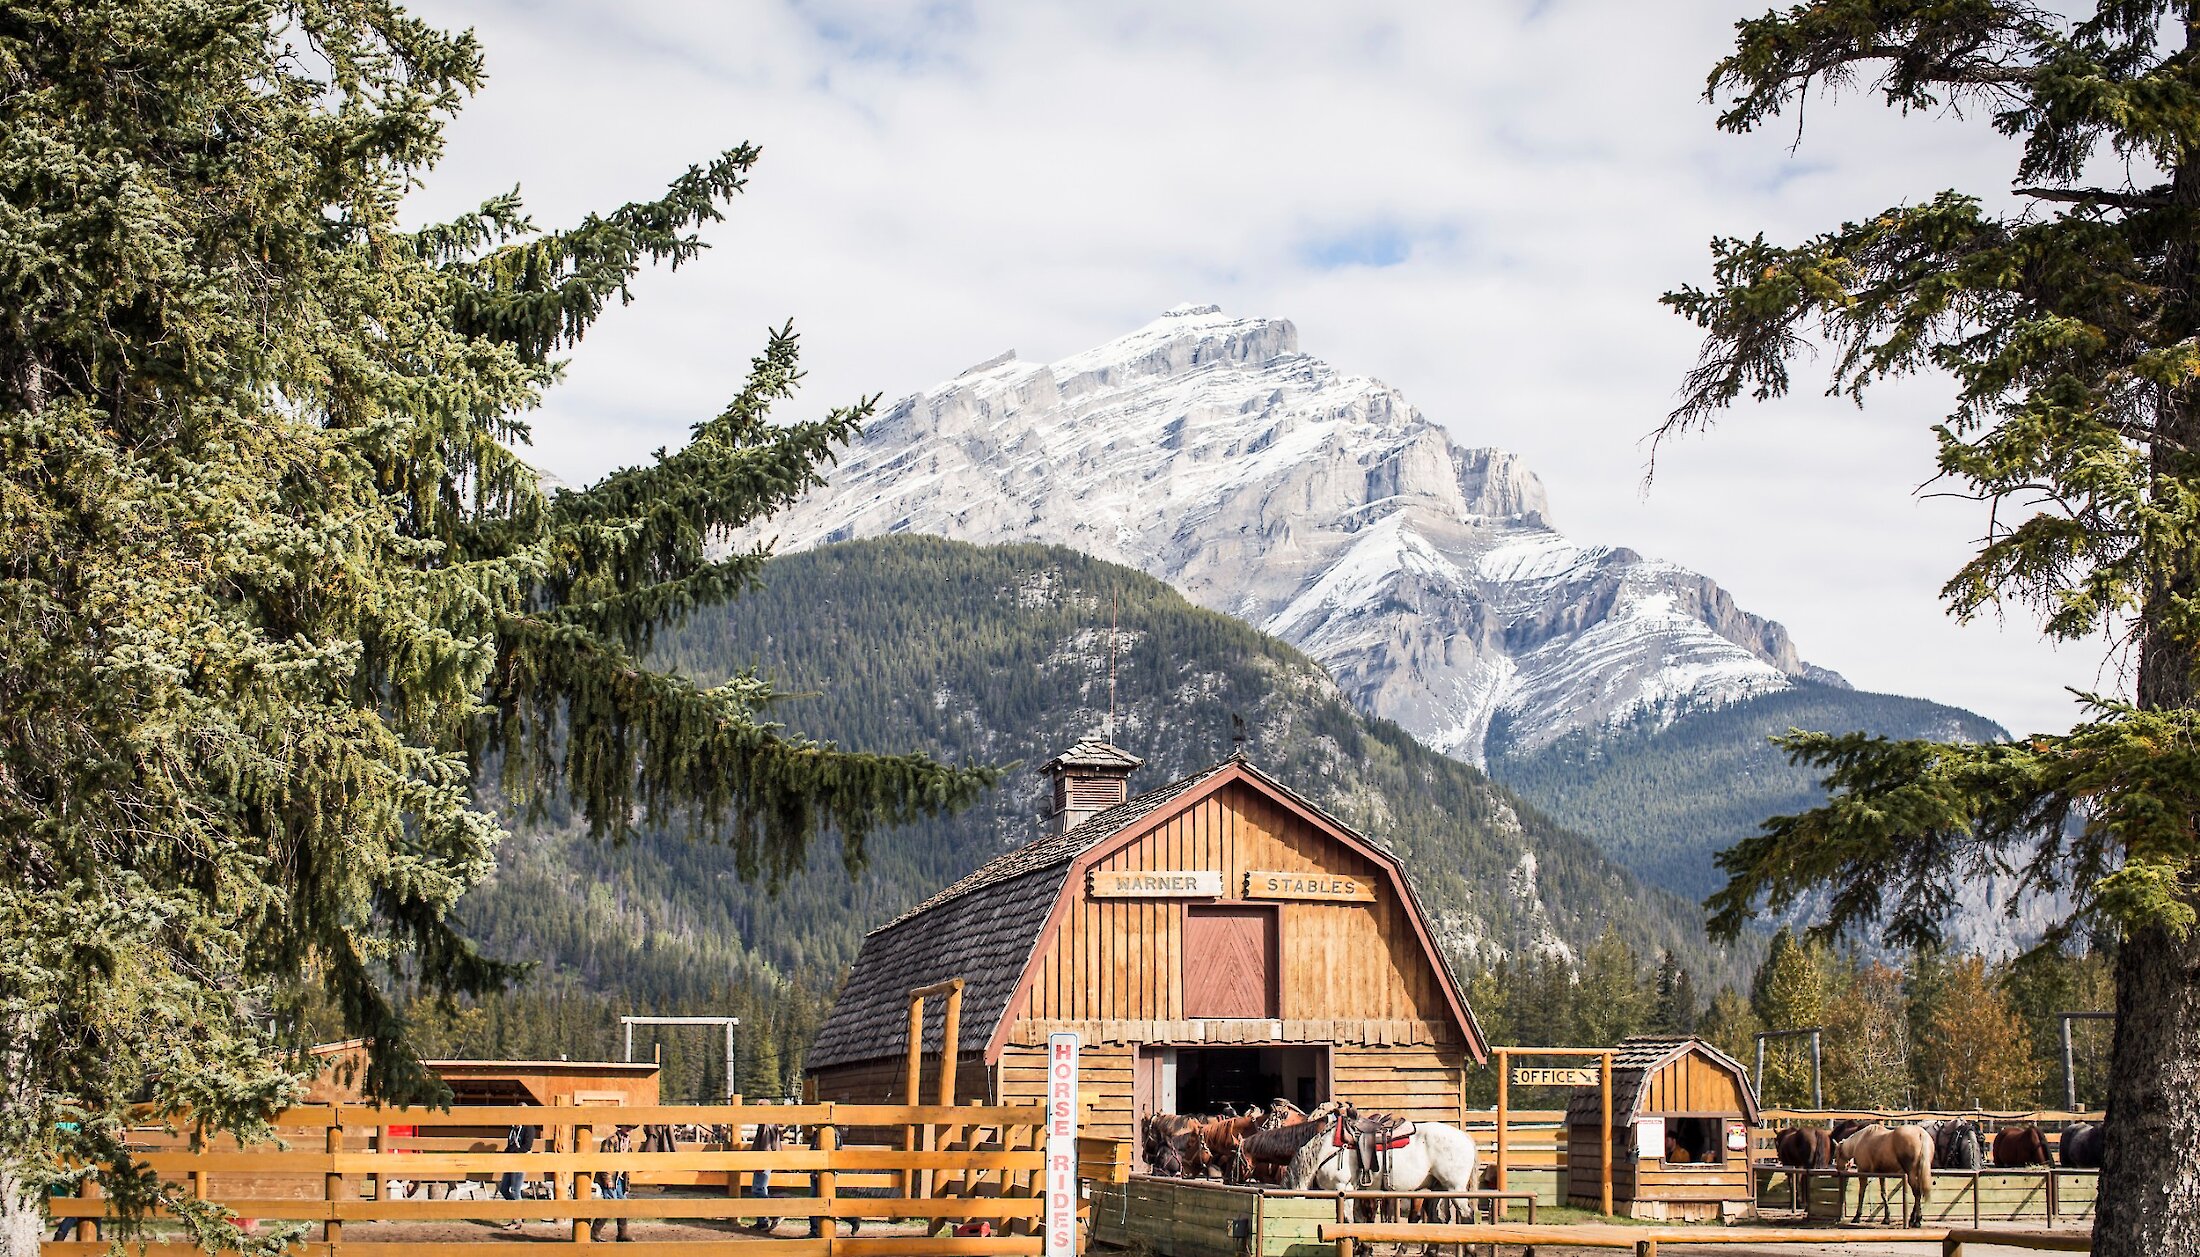 The Warner Stables in Banff